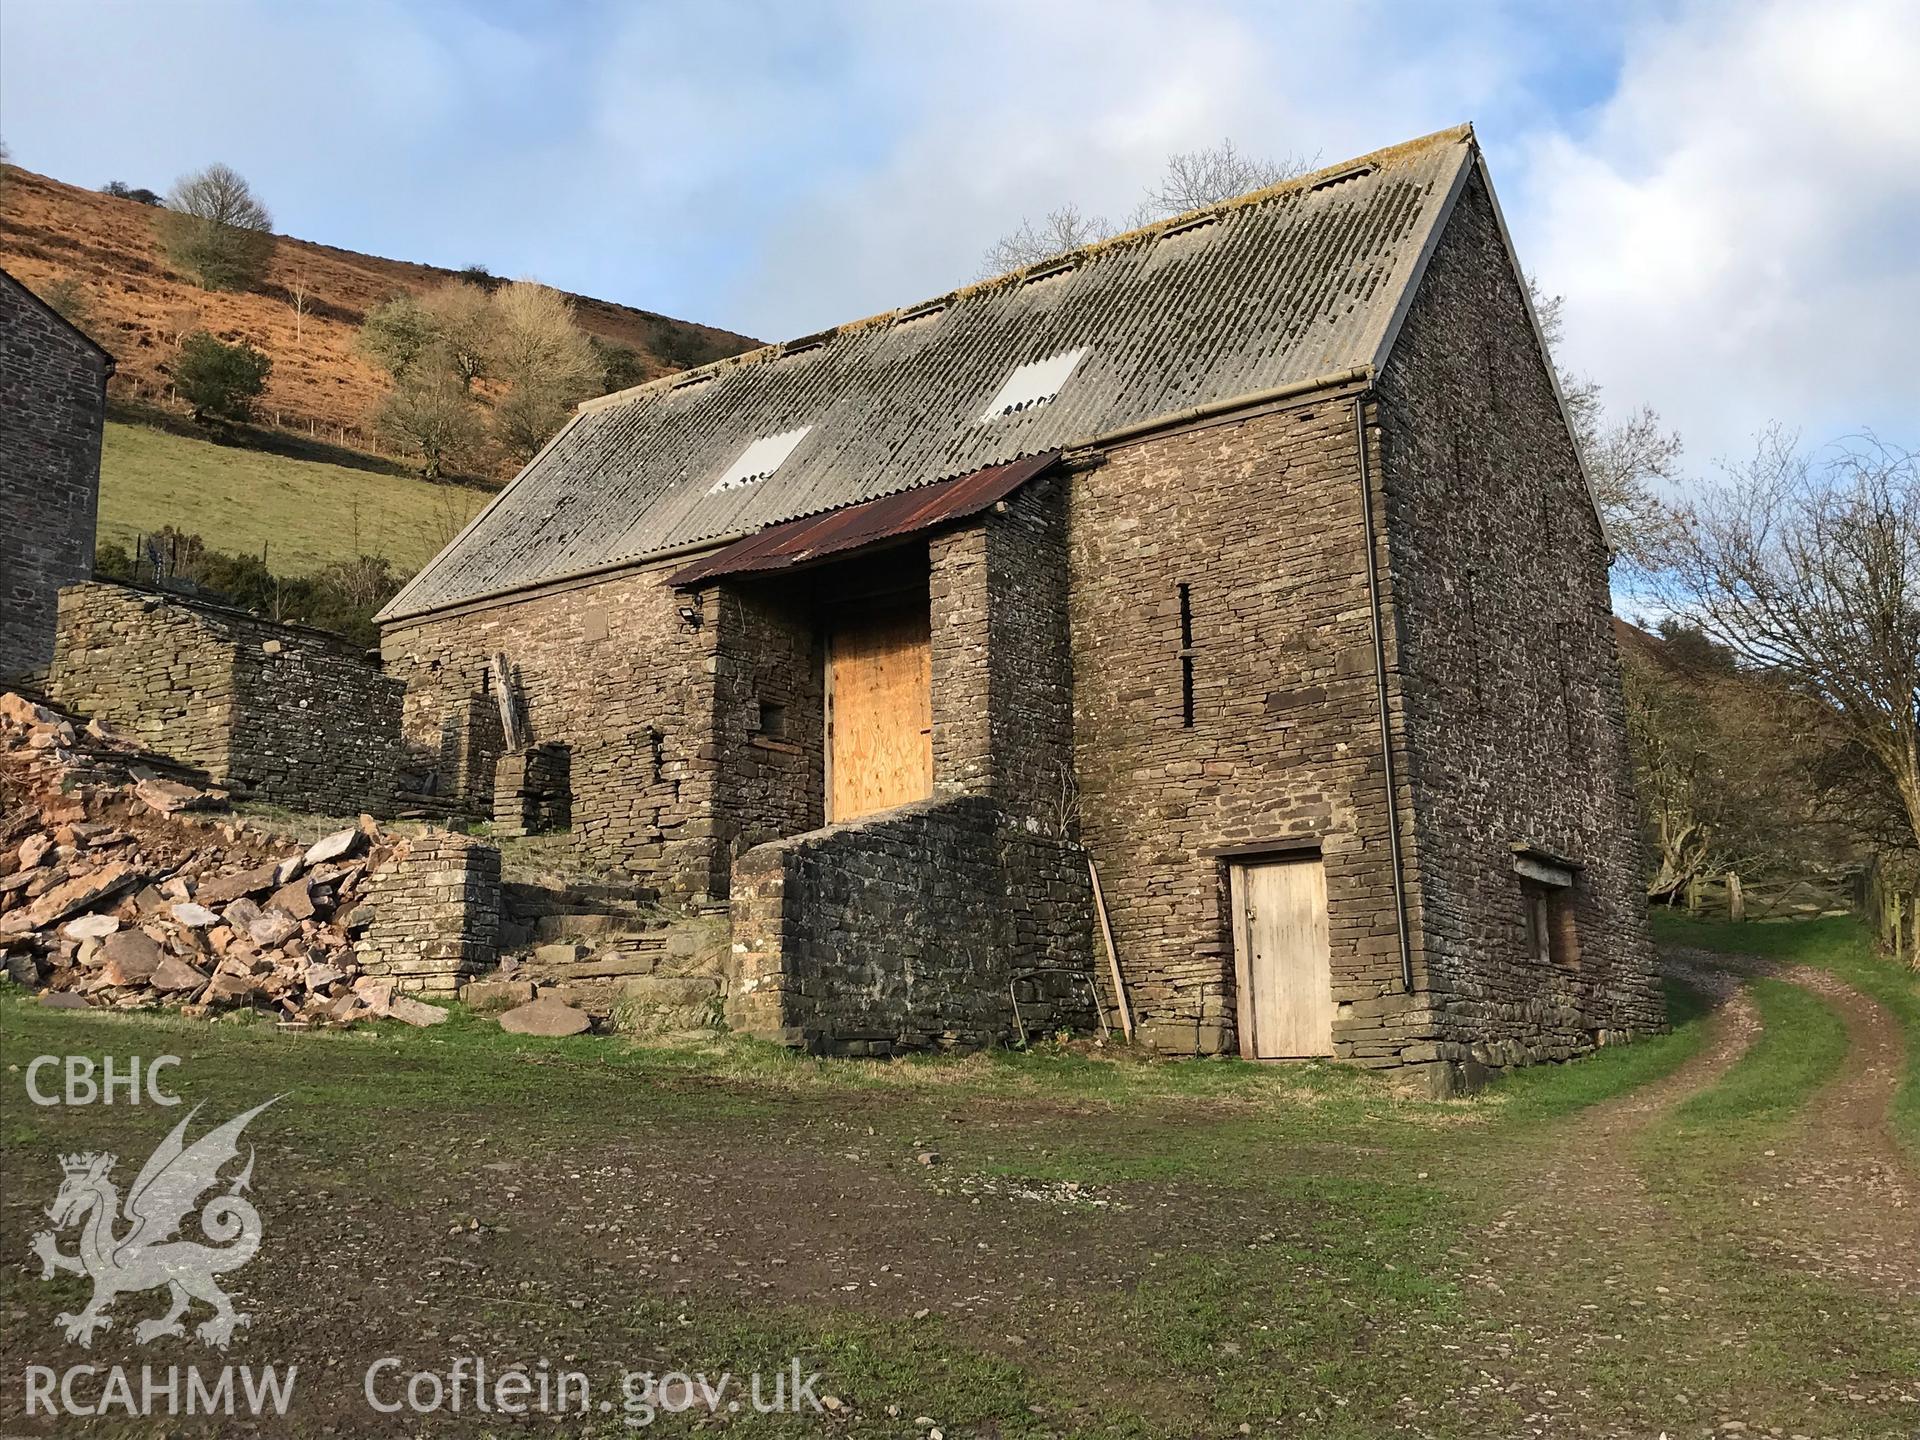 Exterior view of outbuilding at Ty-Hwnt-y-Bwlch, Crucorney. Colour photograph taken by Paul R. Davis on 1st January 2019.